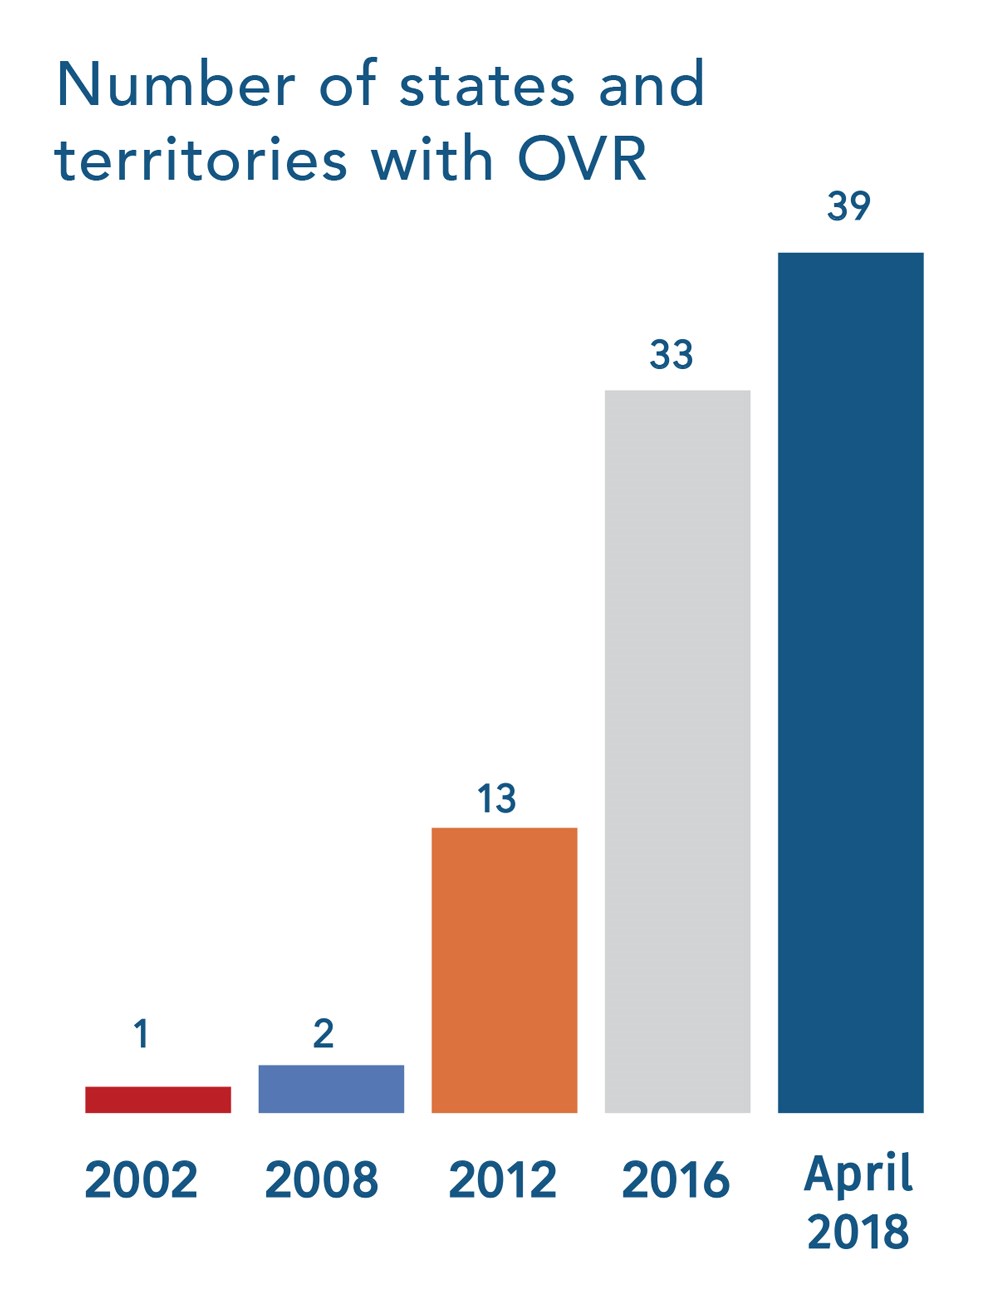 Chart of Number of states and territories with OVR from 2003-2018.